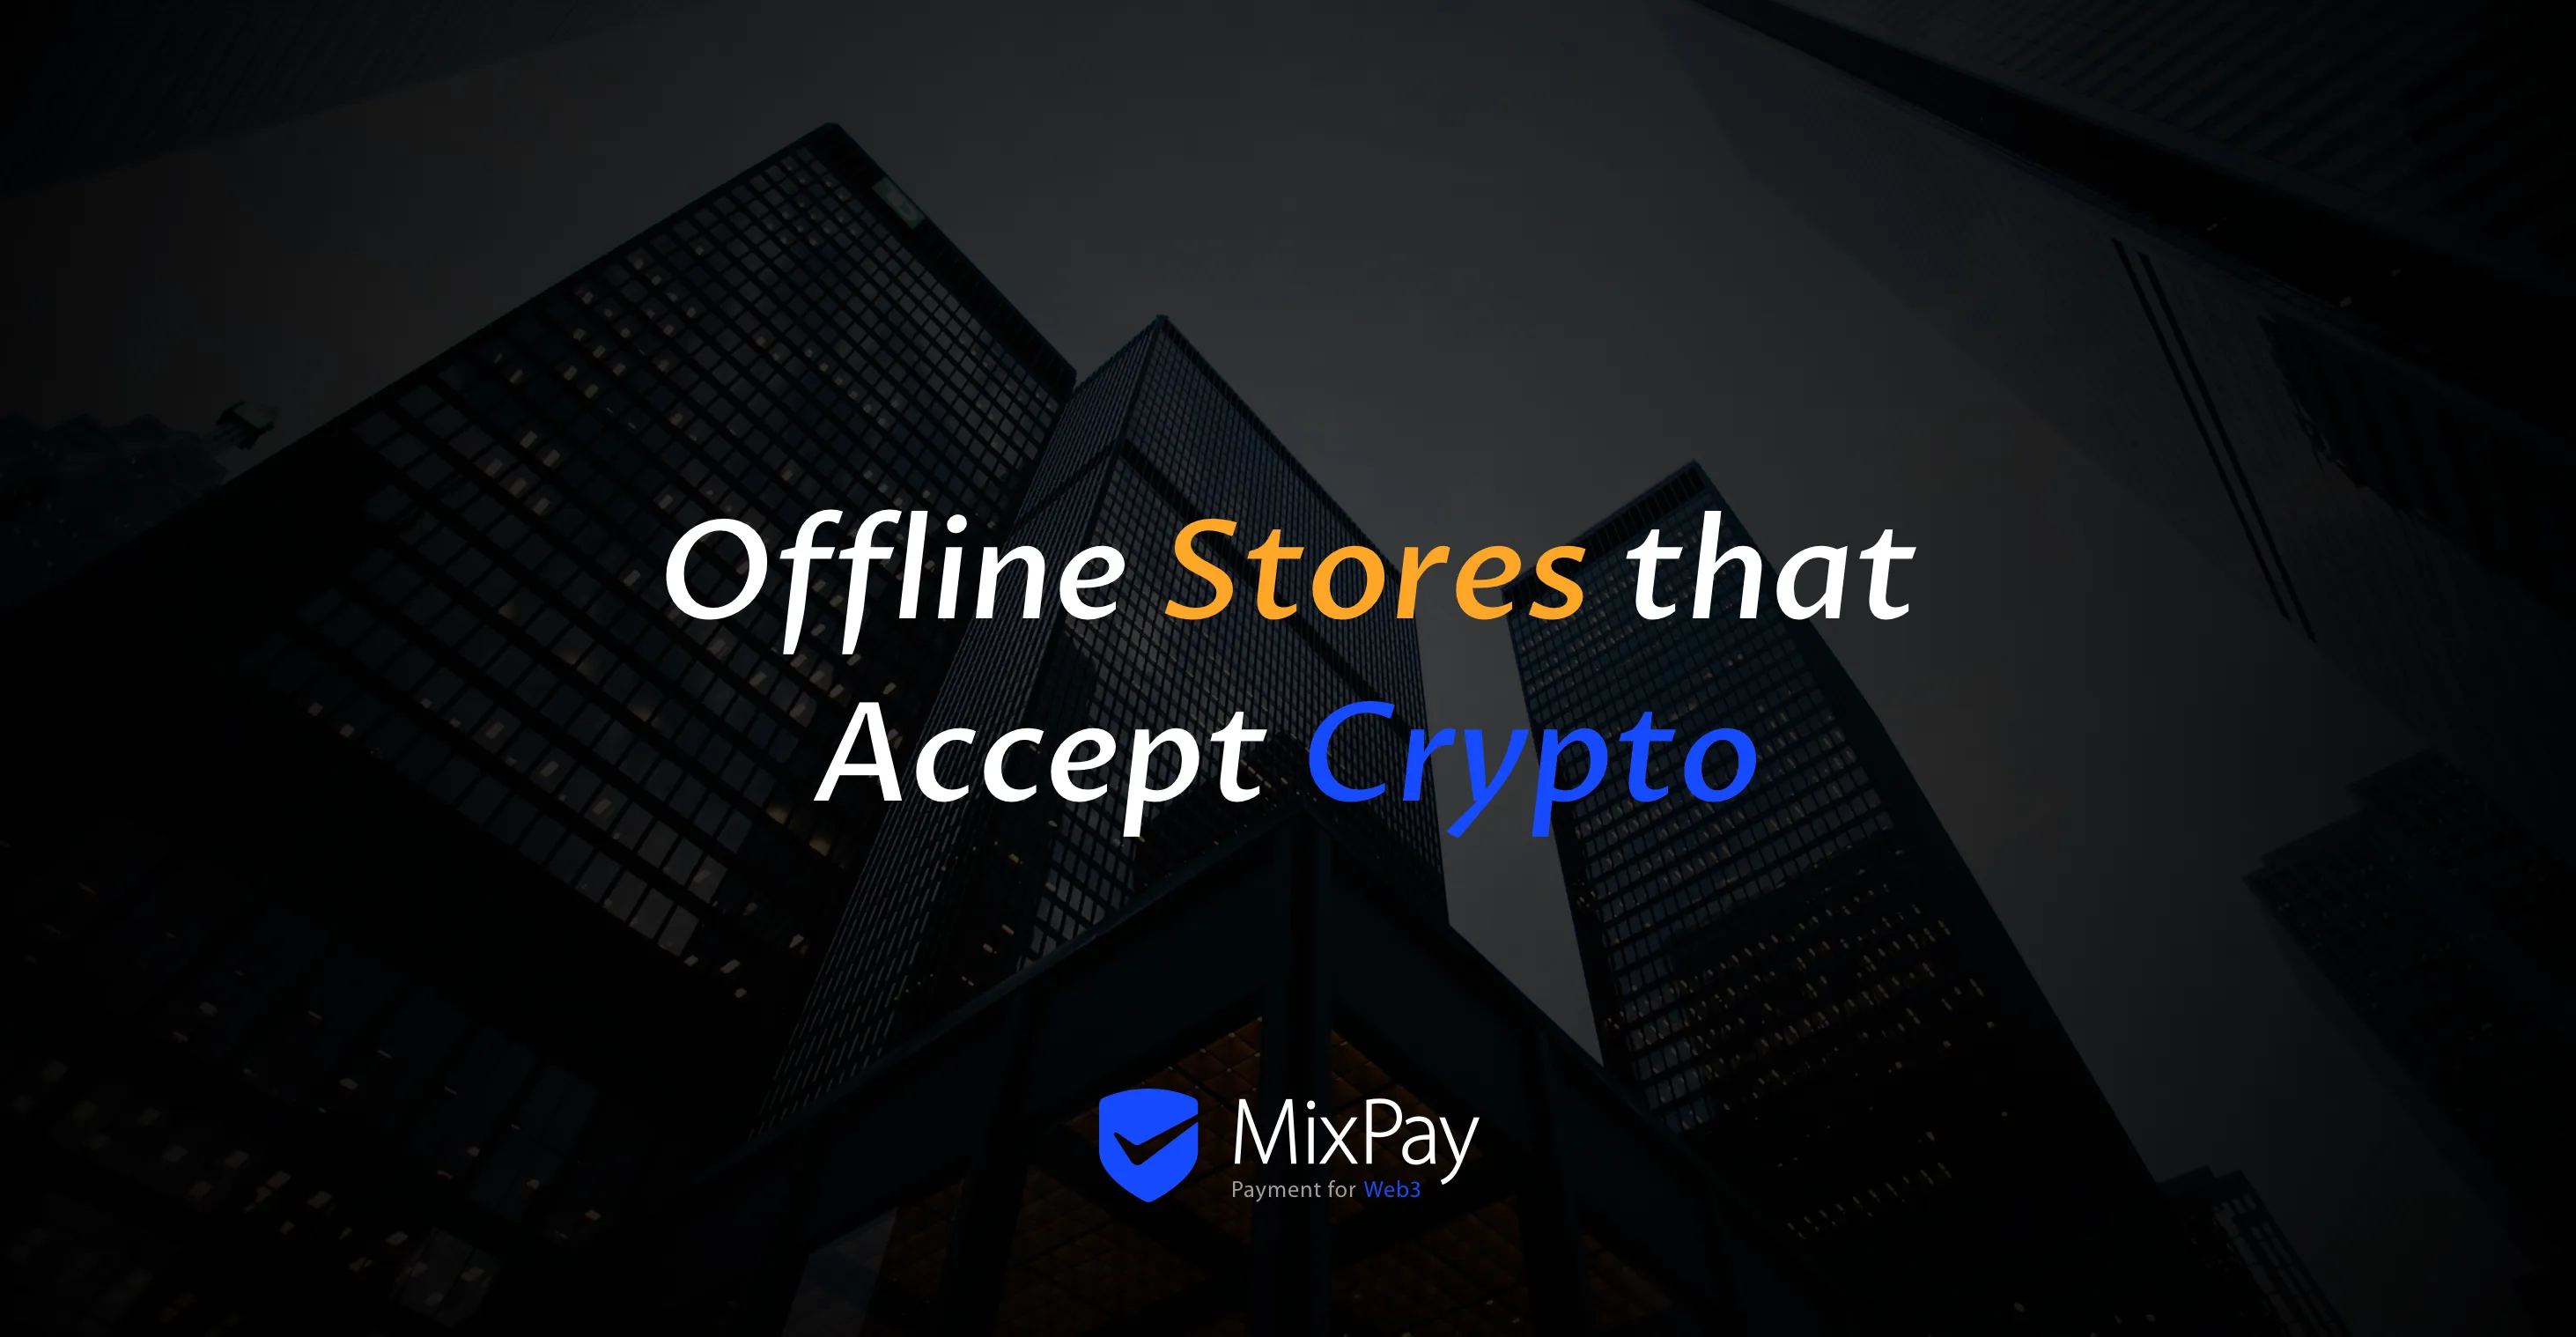 Offline stores that accept cryptocurrency with MixPay